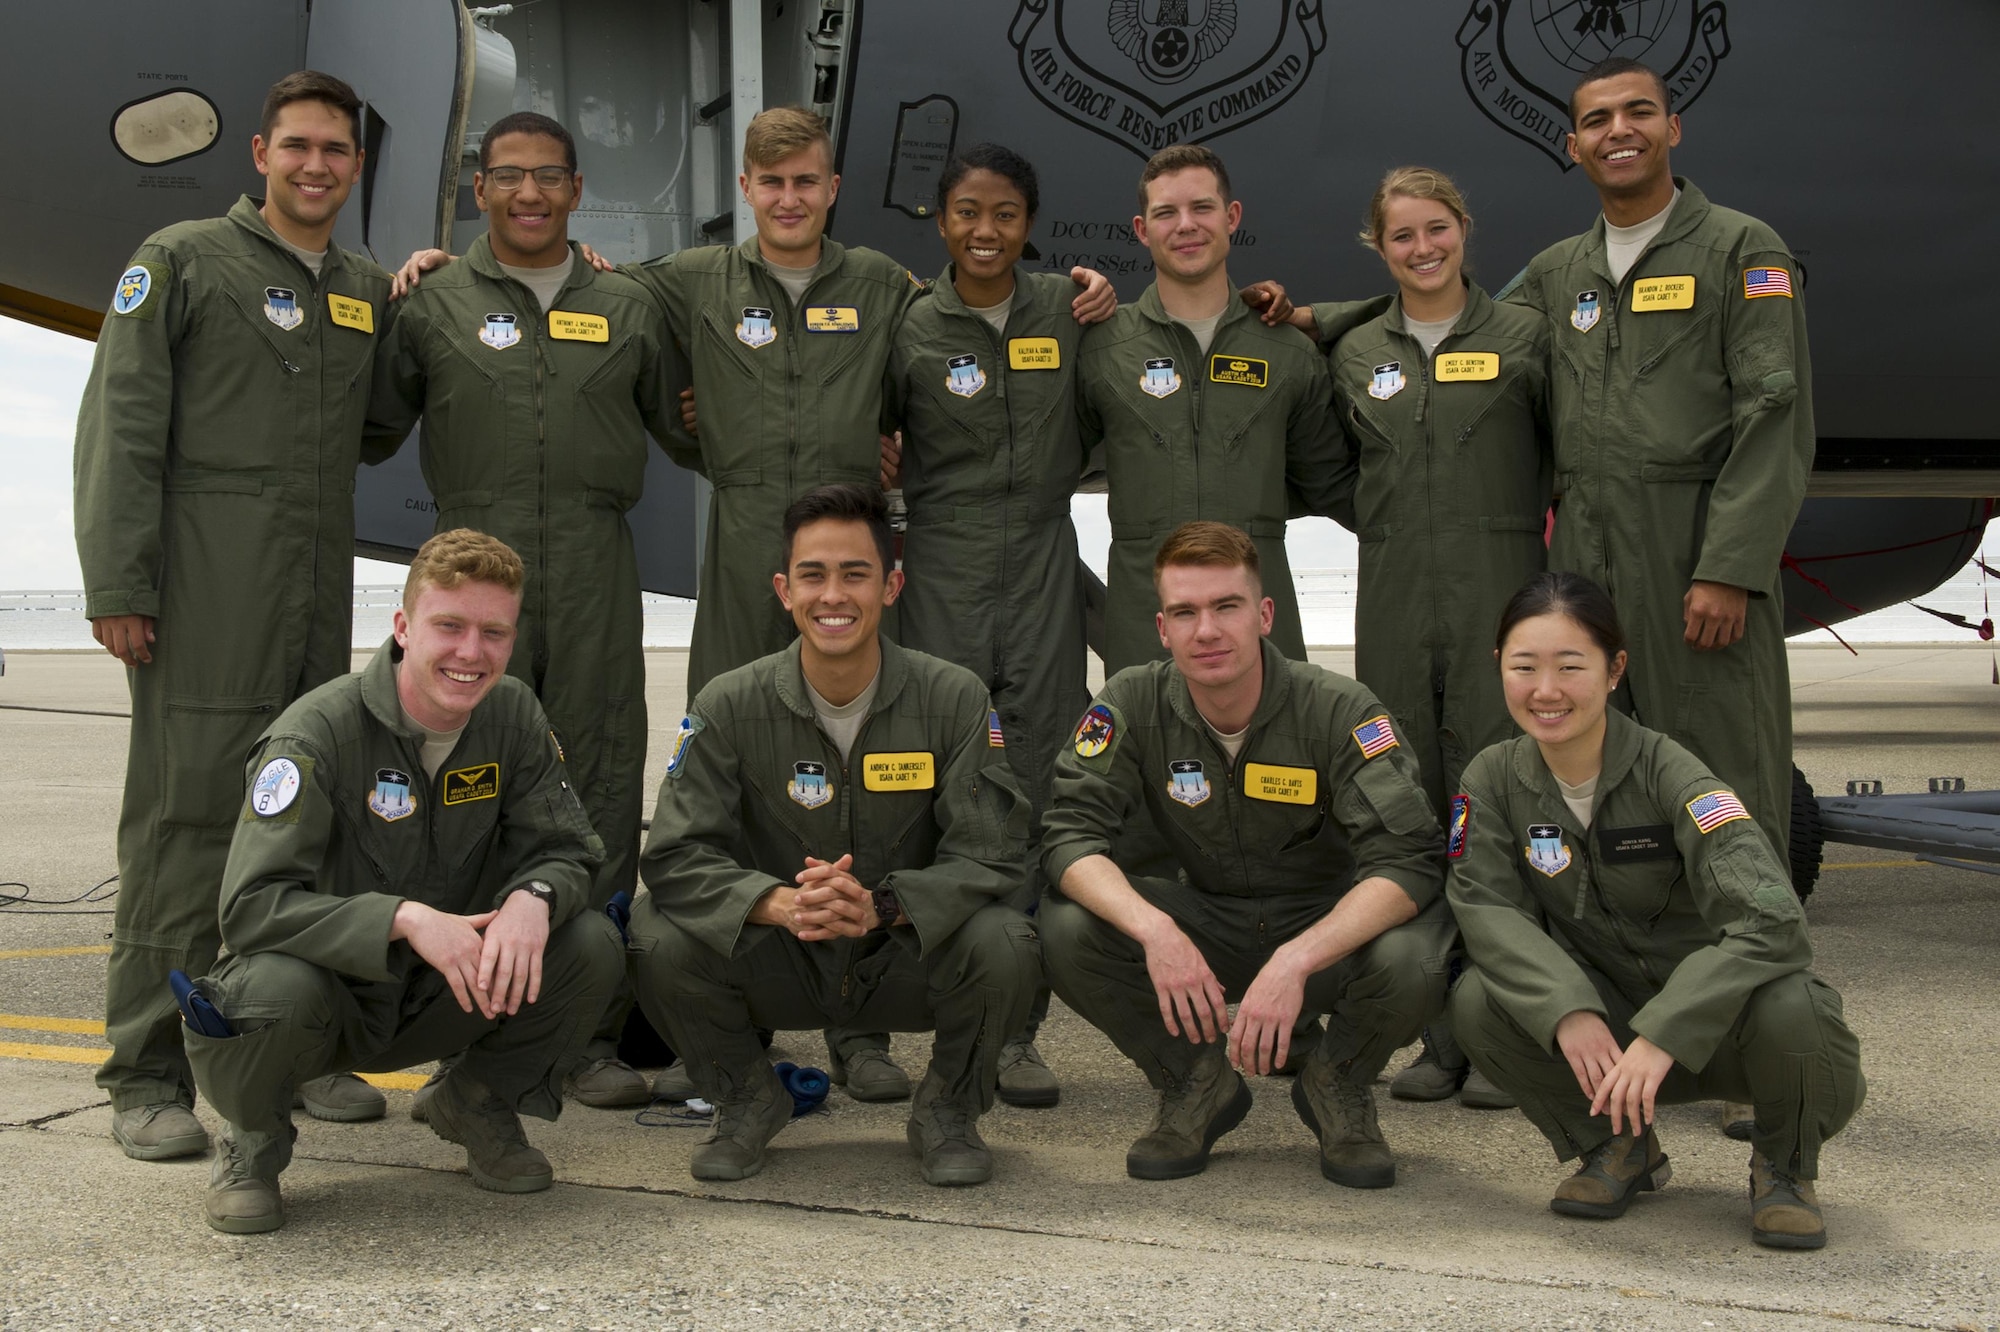 Eleven United States Air Force Academy cadets pose for a photo June 9, 2017, at Beale Air Force Base, California. The cadets were visiting the base for their Ops Air Force tour. (U.S. Air Force photo by Senior Airman Tara R. Abrahams)